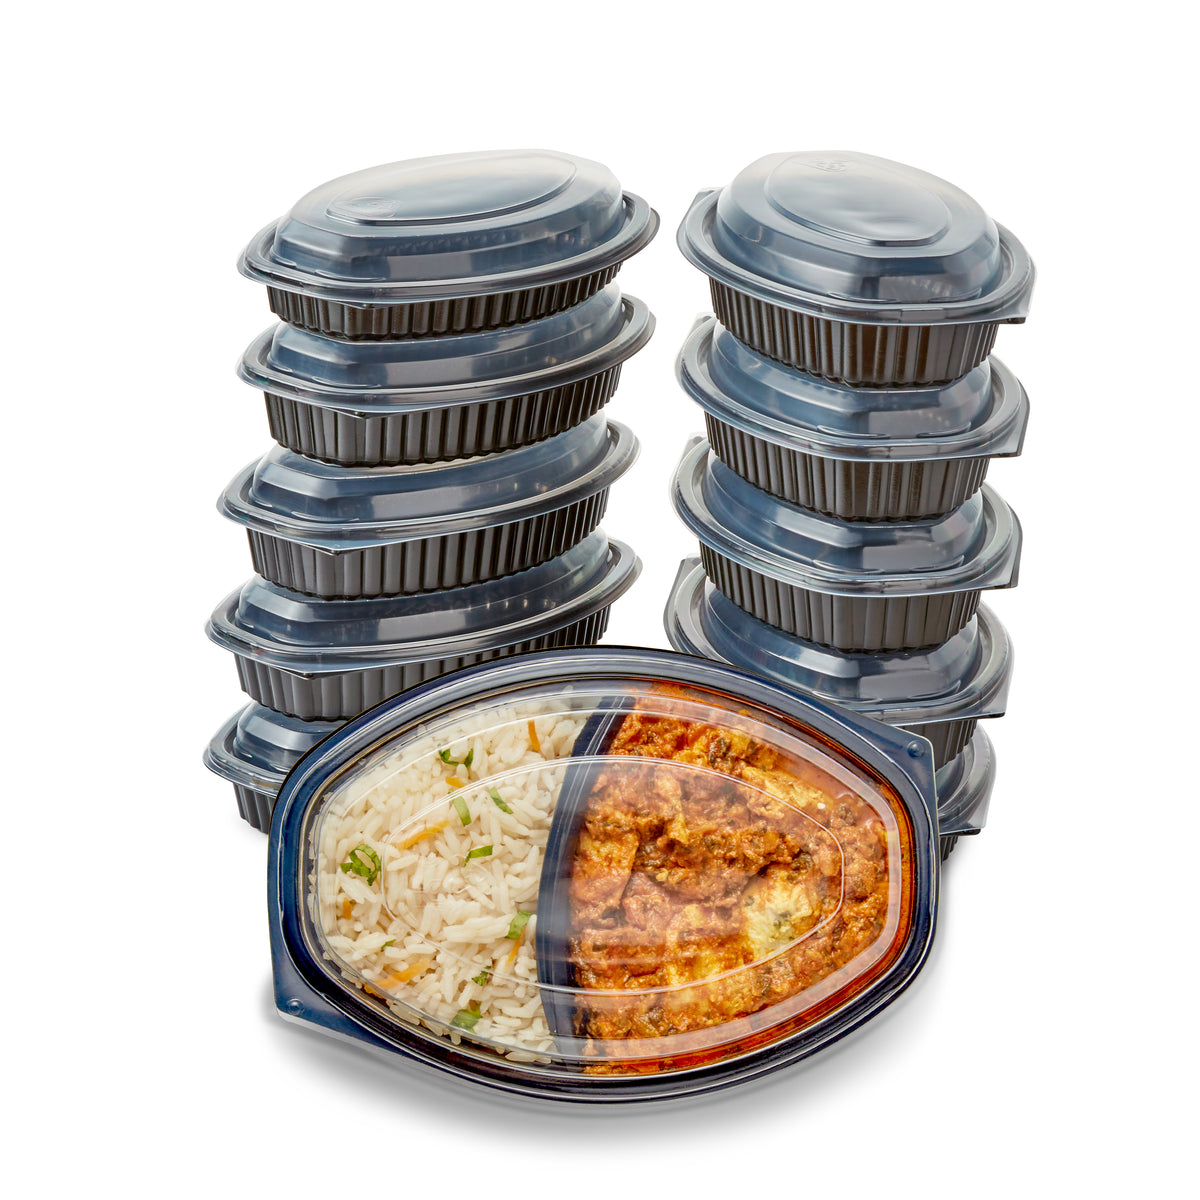 10 x 560 ml (19.8 ounce) Microwavable Twin Hot Food Meal Prep Trays & Lids (207mm x 143mm x 59mm)